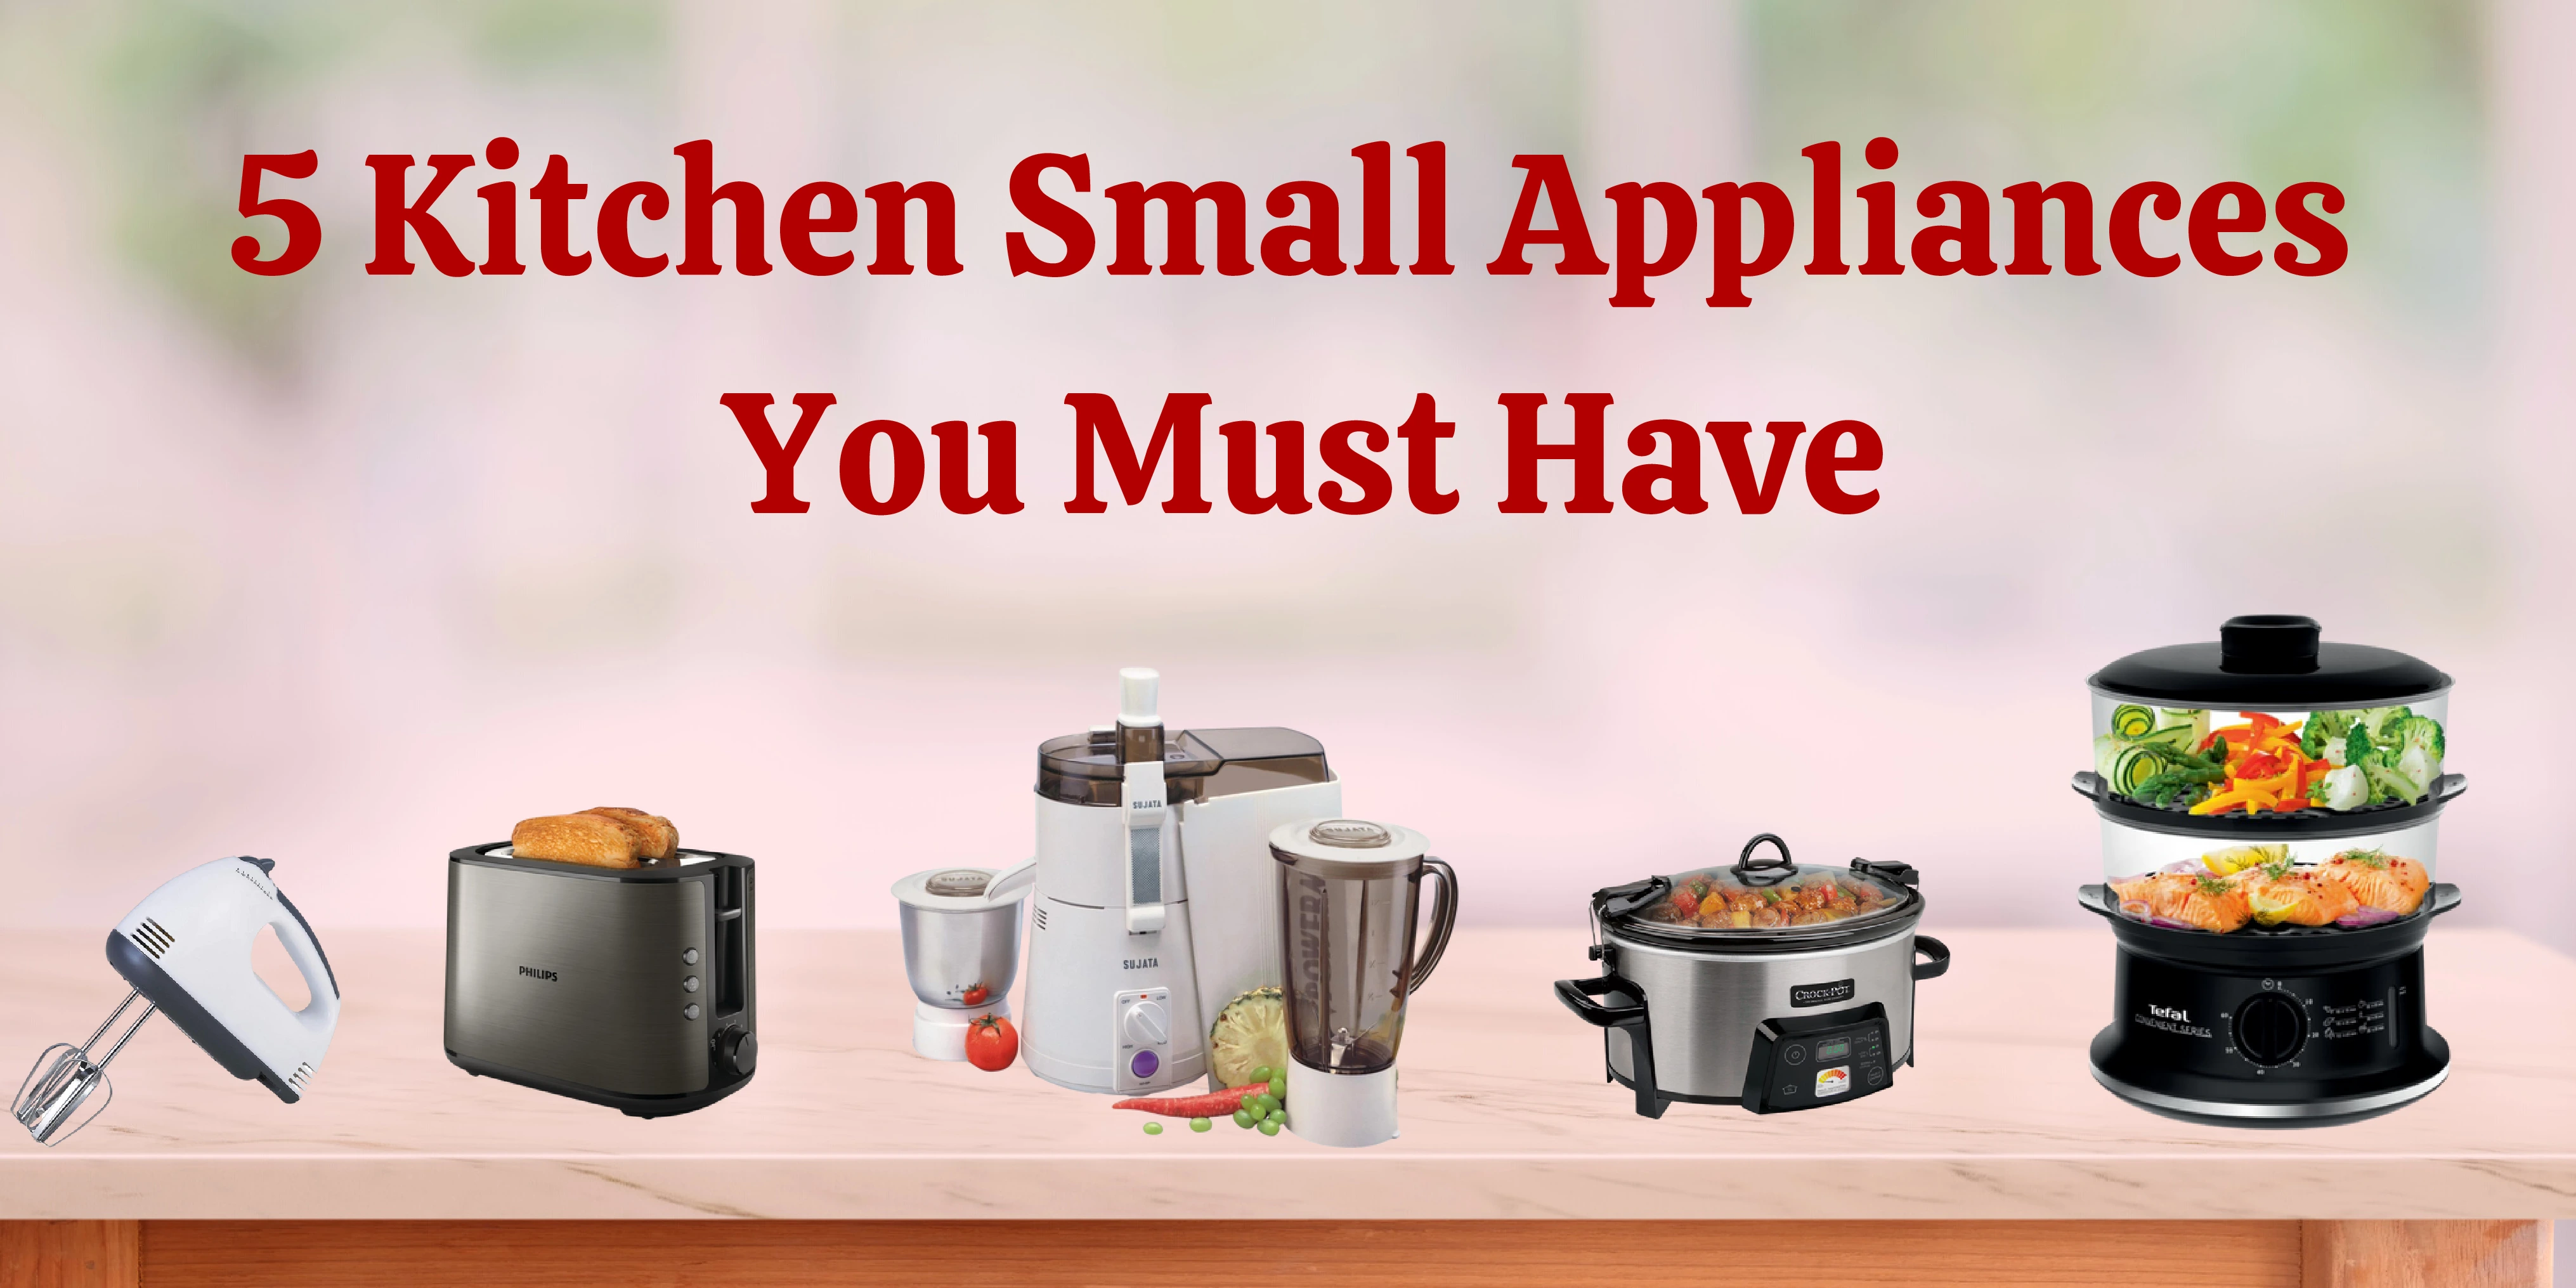 Small cooking appliances